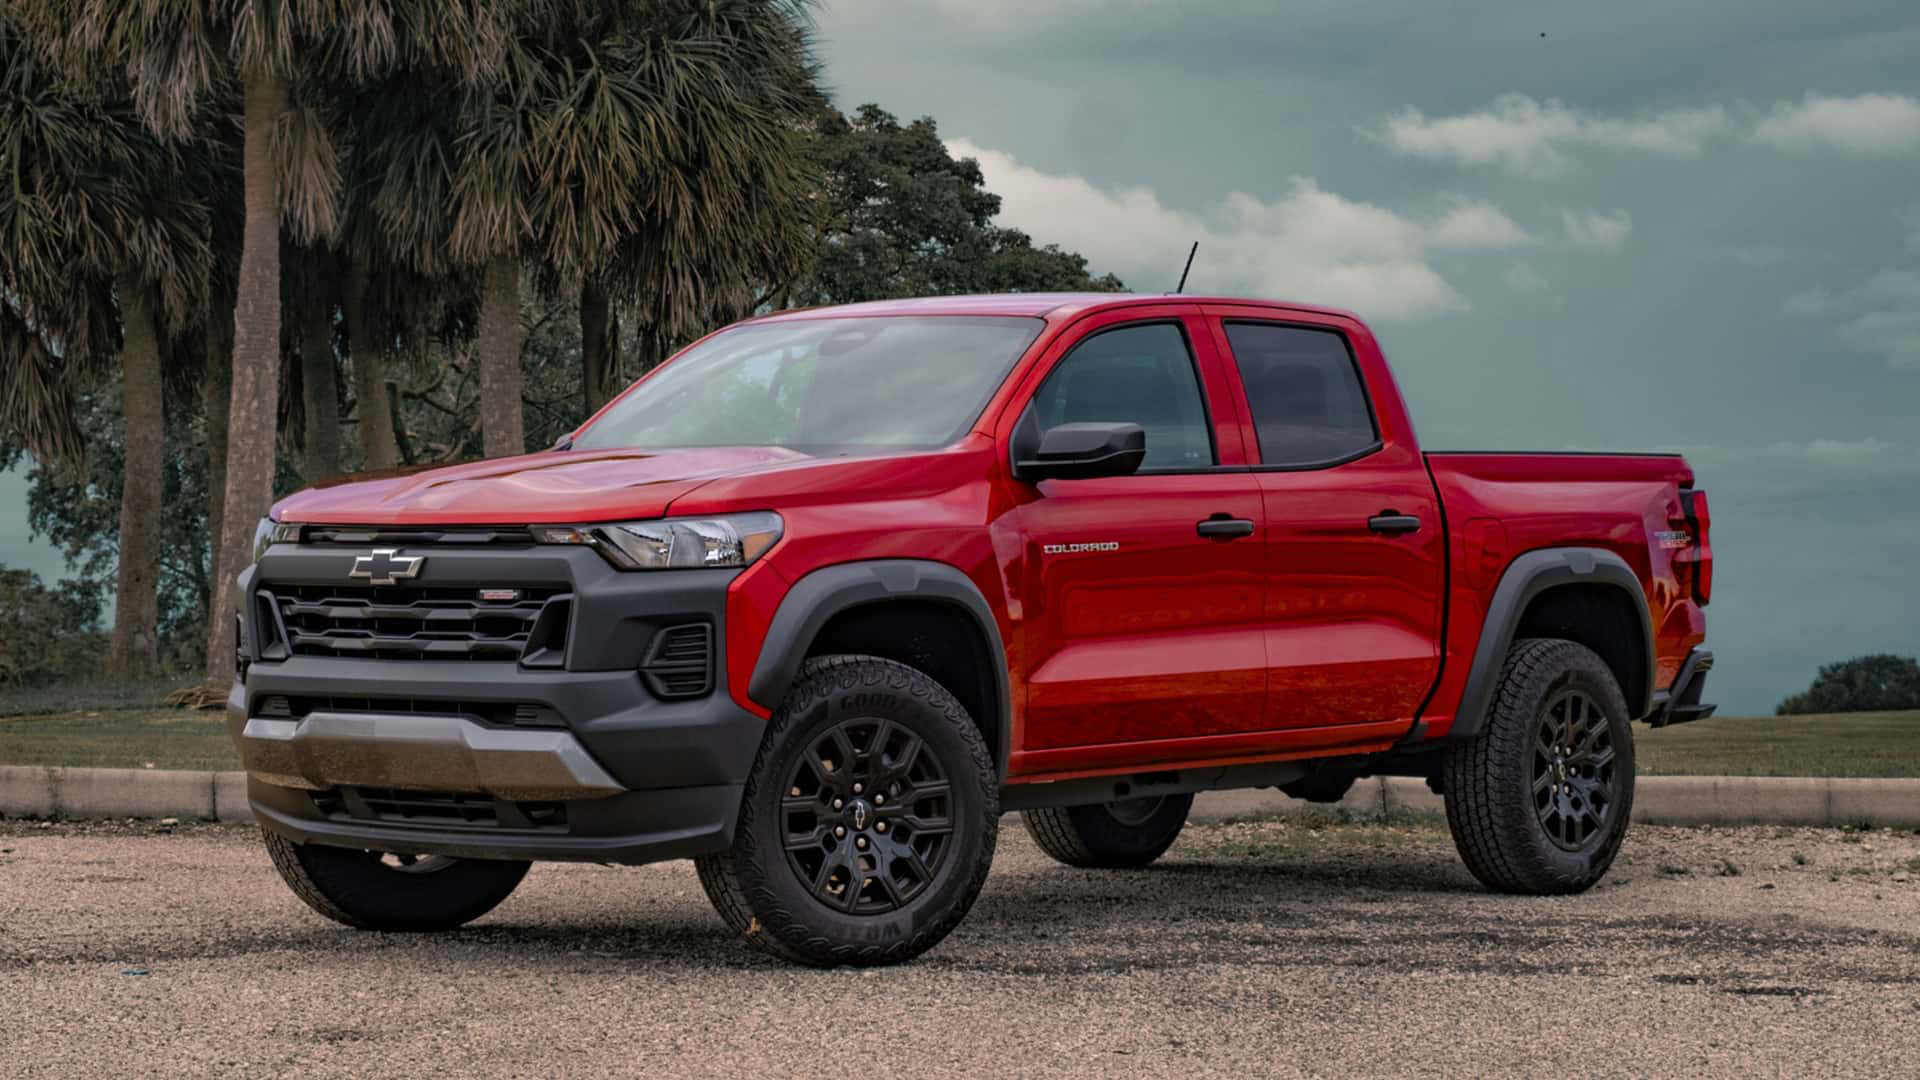 The Chevrolet Colorado Trail Boss Is An OffRoad Pickup For The Masses